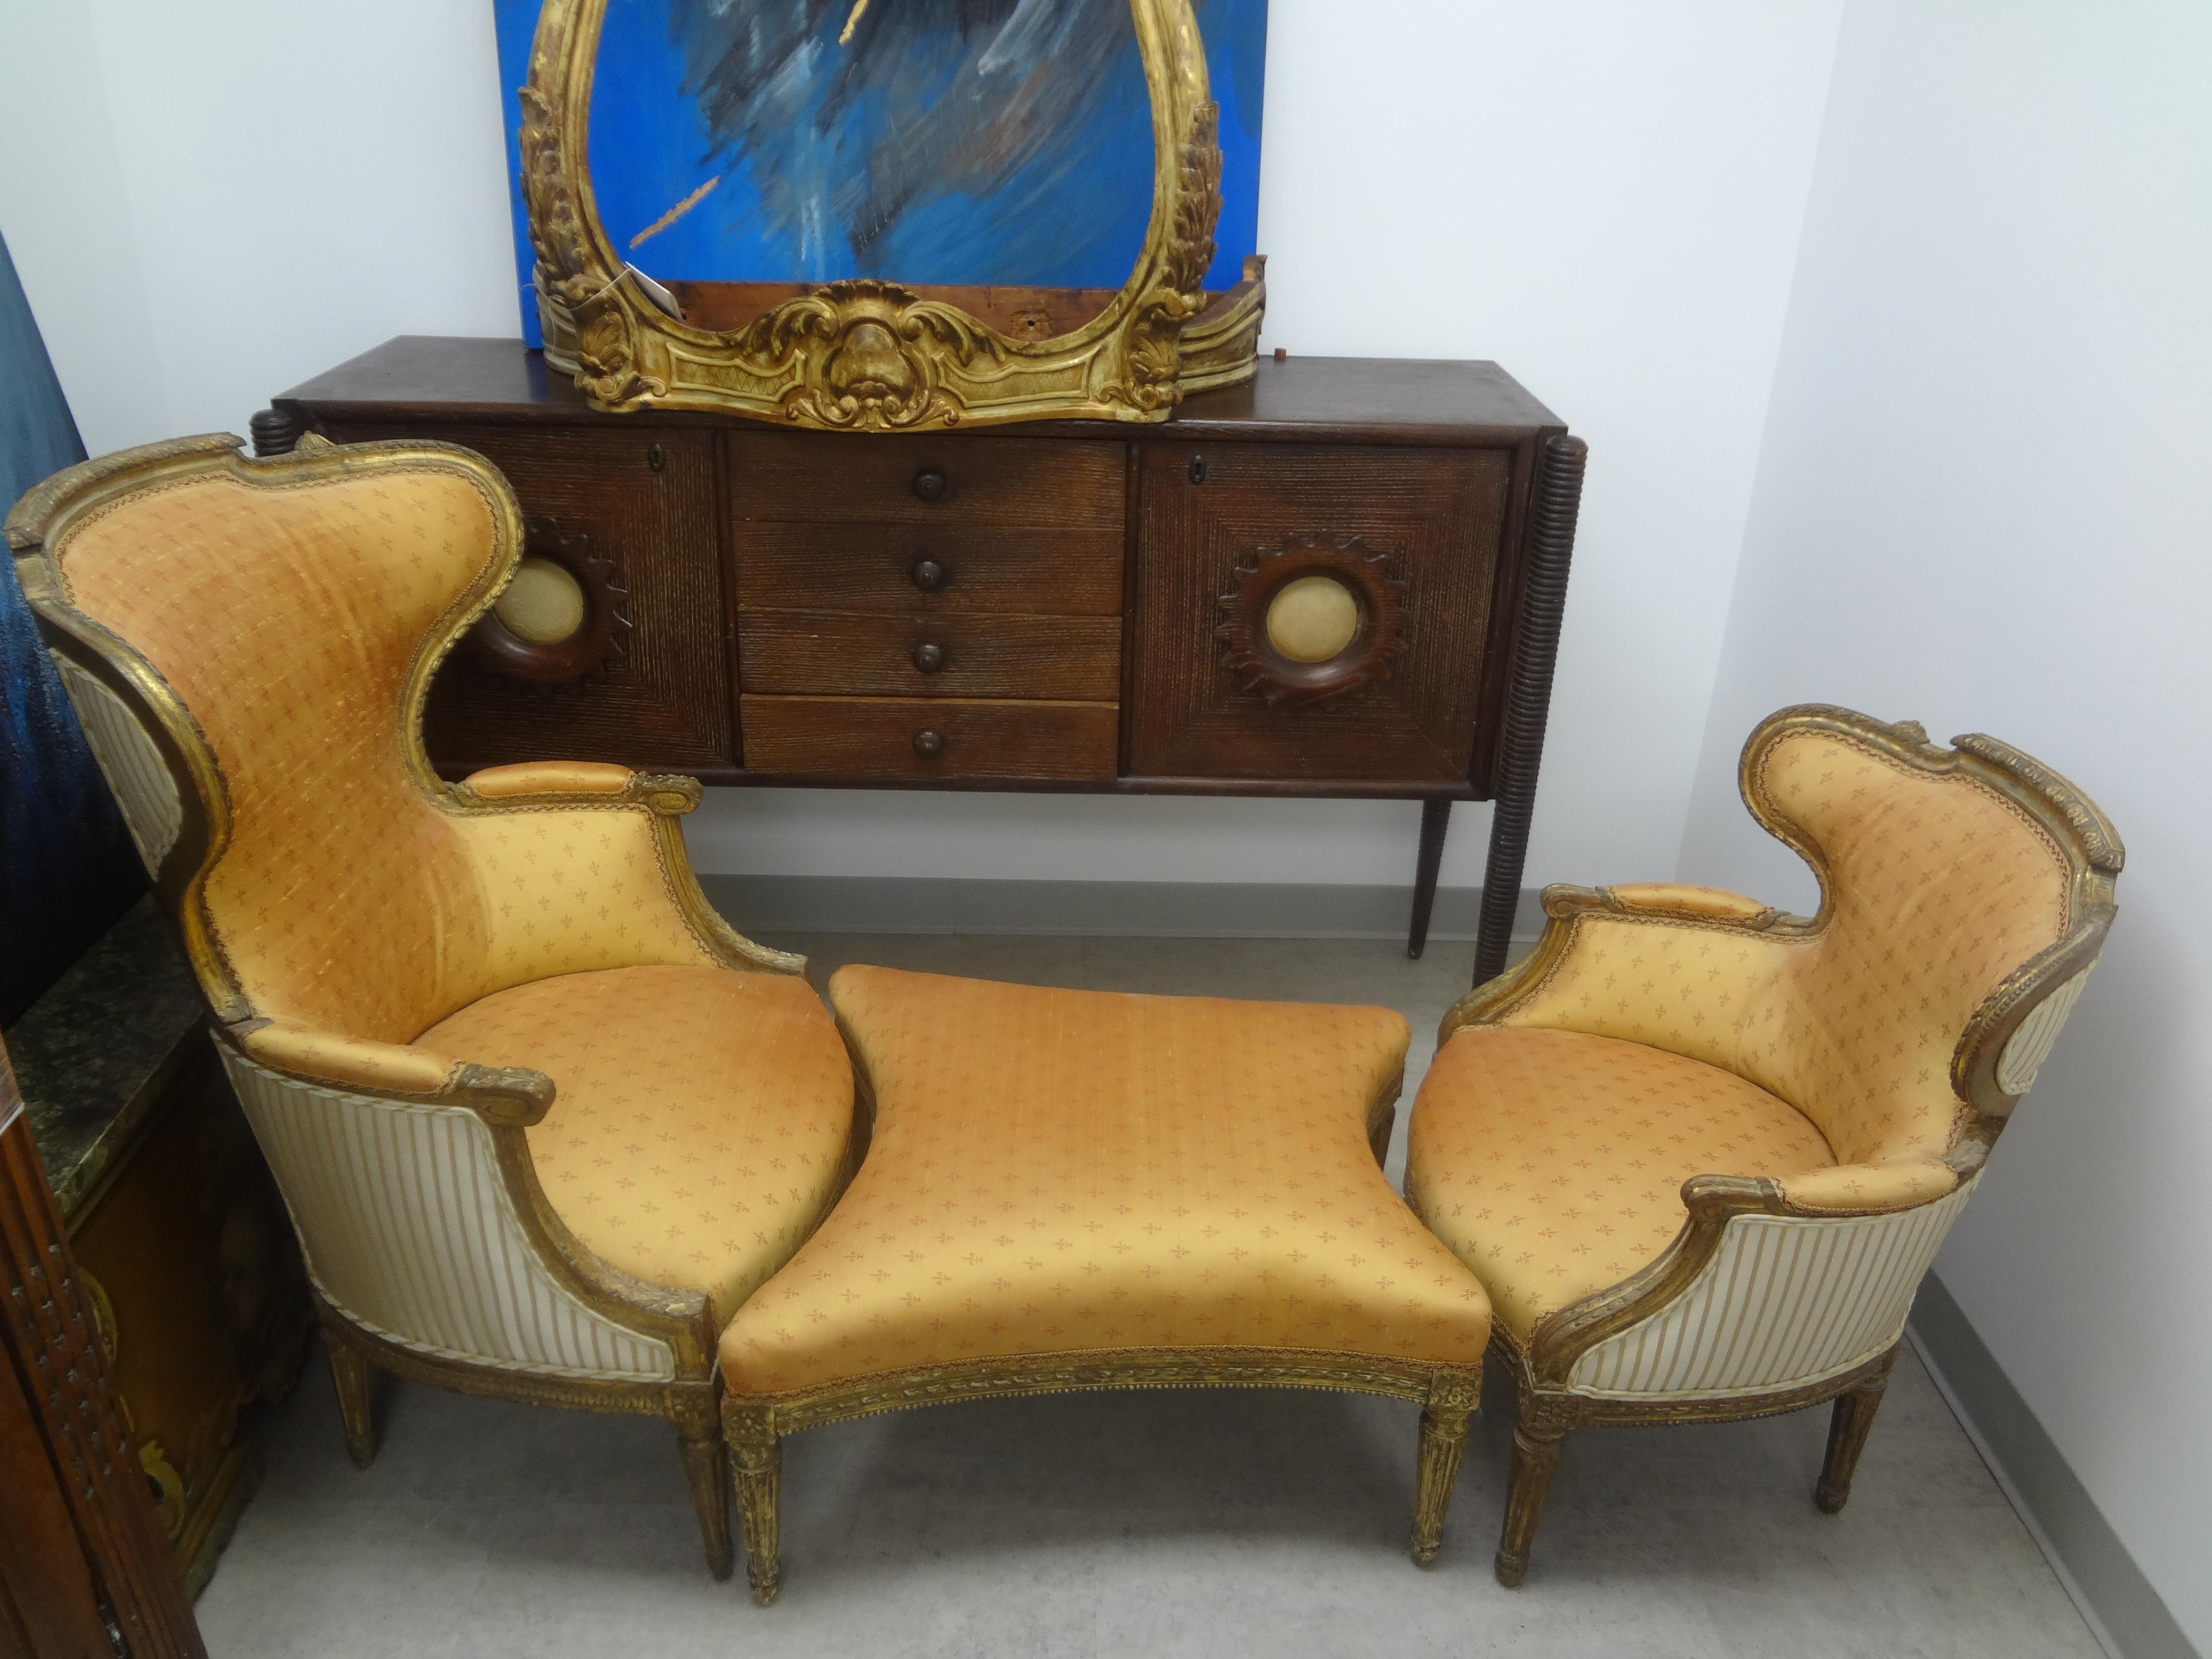 19th century French Louis XVI style giltwood duchesse Brisee.
Stunning 19th century French Louis XVI style gilt wood Duchesse Brisee. Our unusually shaped French Napoleon III duchesse brisee or chaise lounge is comprised of three pieces. A large